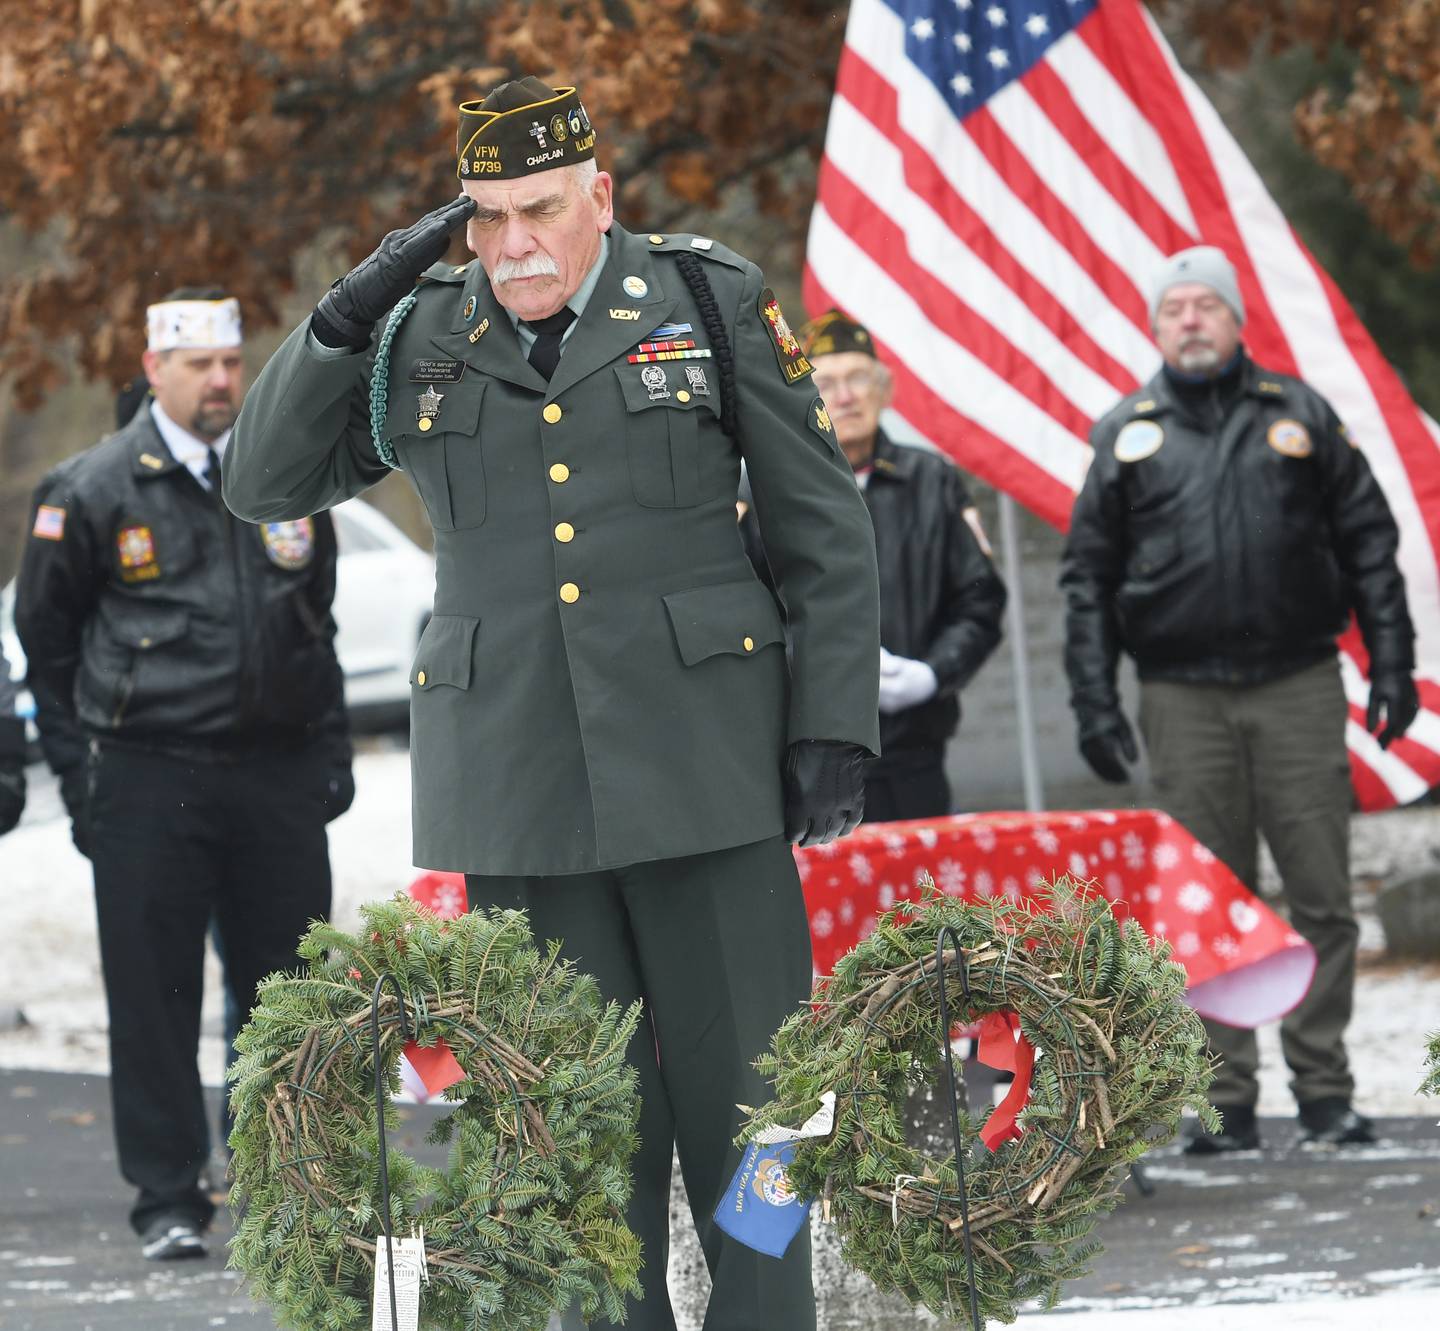 John Tuttle of Oregon, a Vietnam war veteran, salutes after laying a wreath in honor Prisoners of War and those Missing in Action at Daysville Cemetery on Dec. 17 during the Wreaths Across America project. Wreaths were then placed on all veterans' graves by other volunteers and veterans.